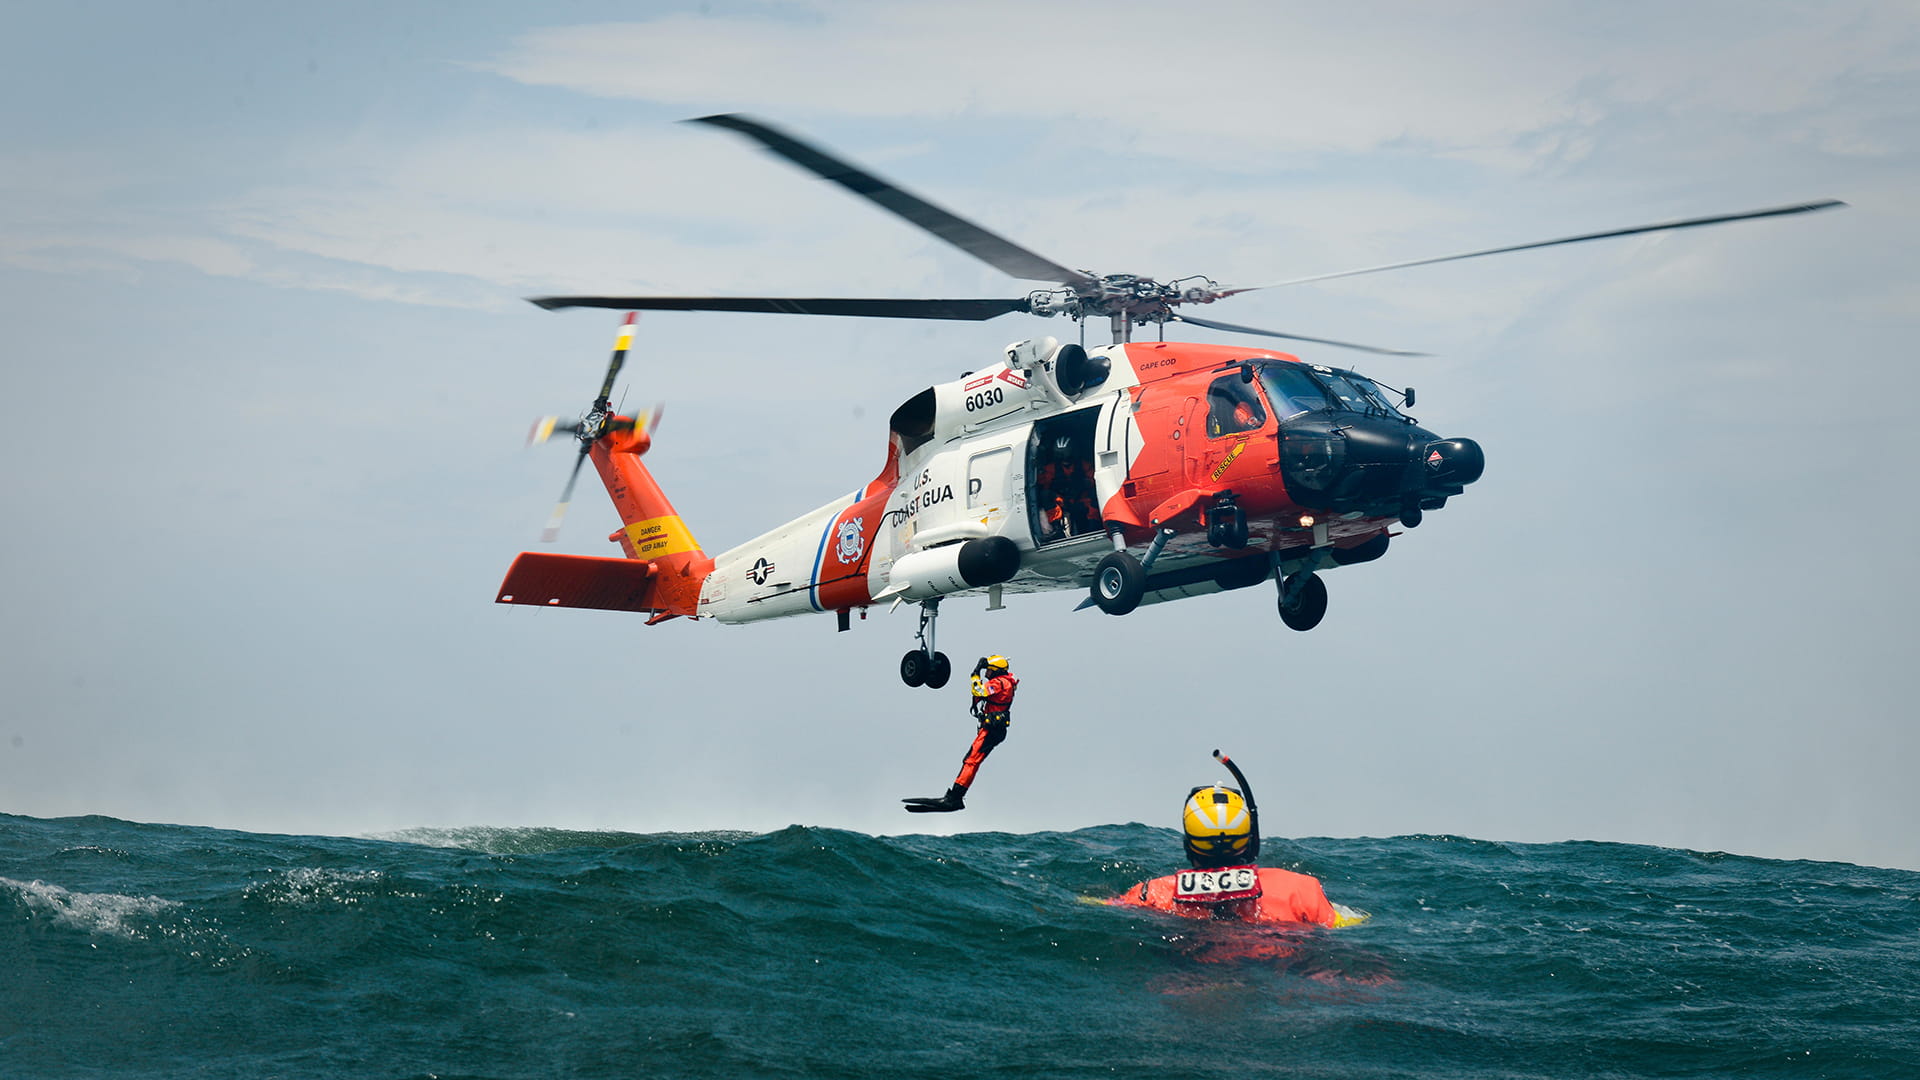 A rescue diver hangs from an MH60 rescue helicopter